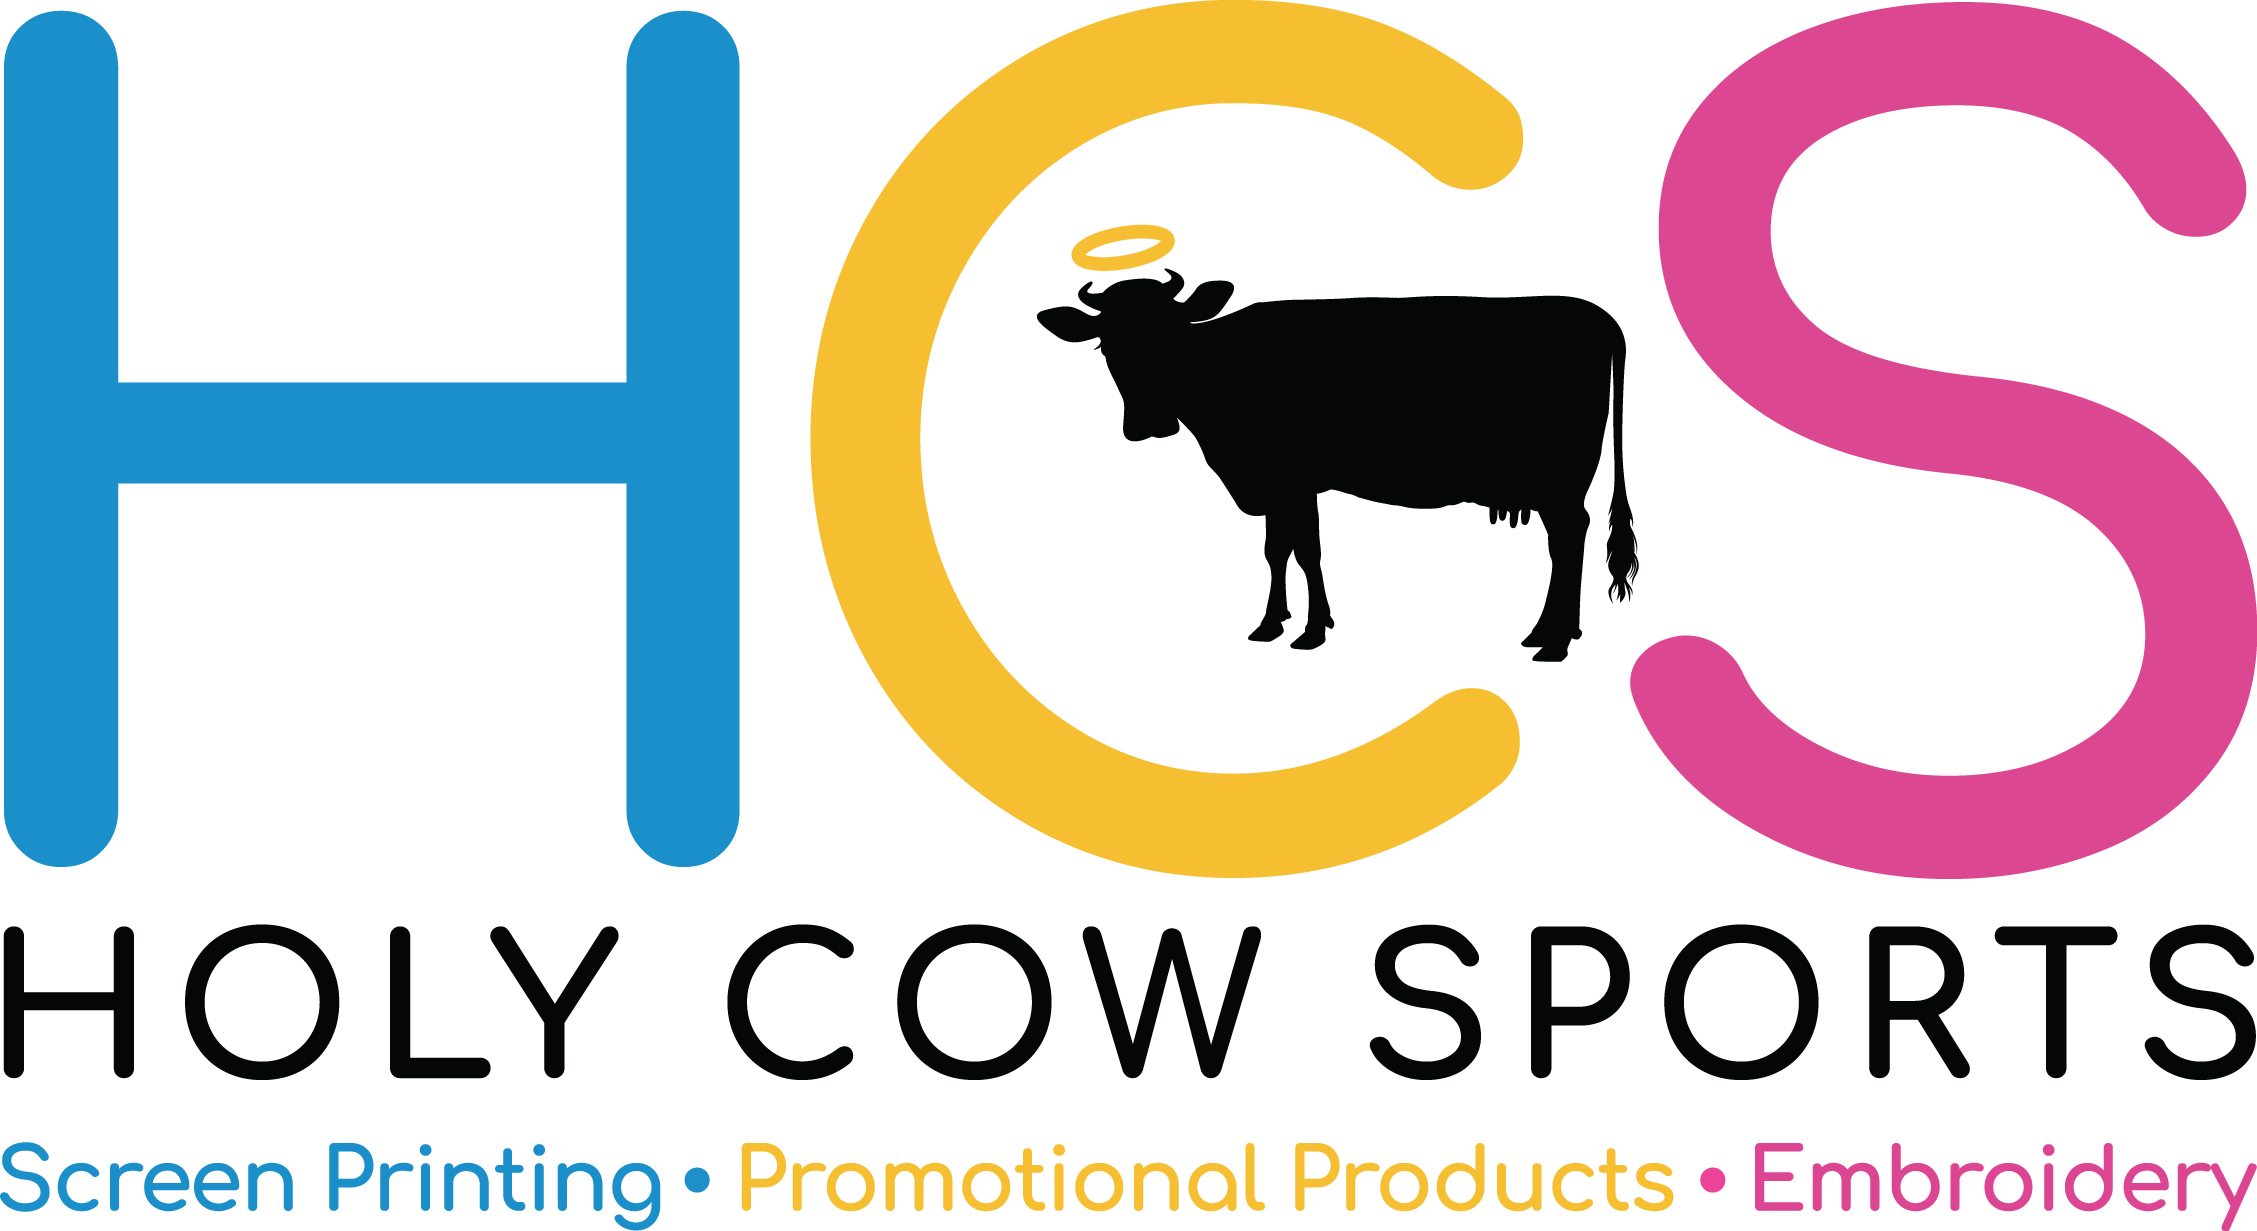 Product Results Sports - Holy Cow